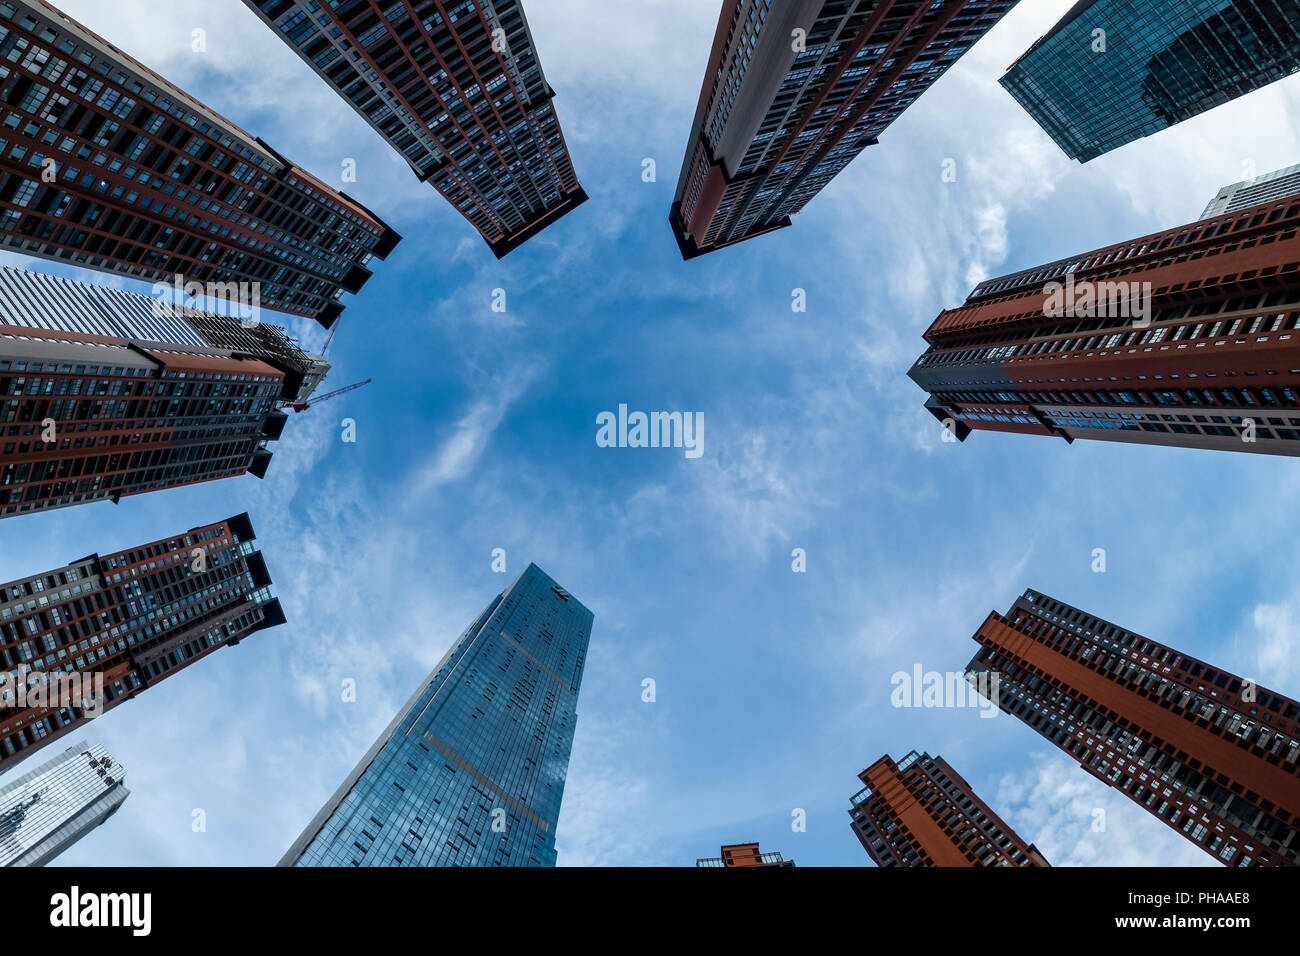 Luxury Apartments in Nanning, China Architectural Perspective Stock Photo